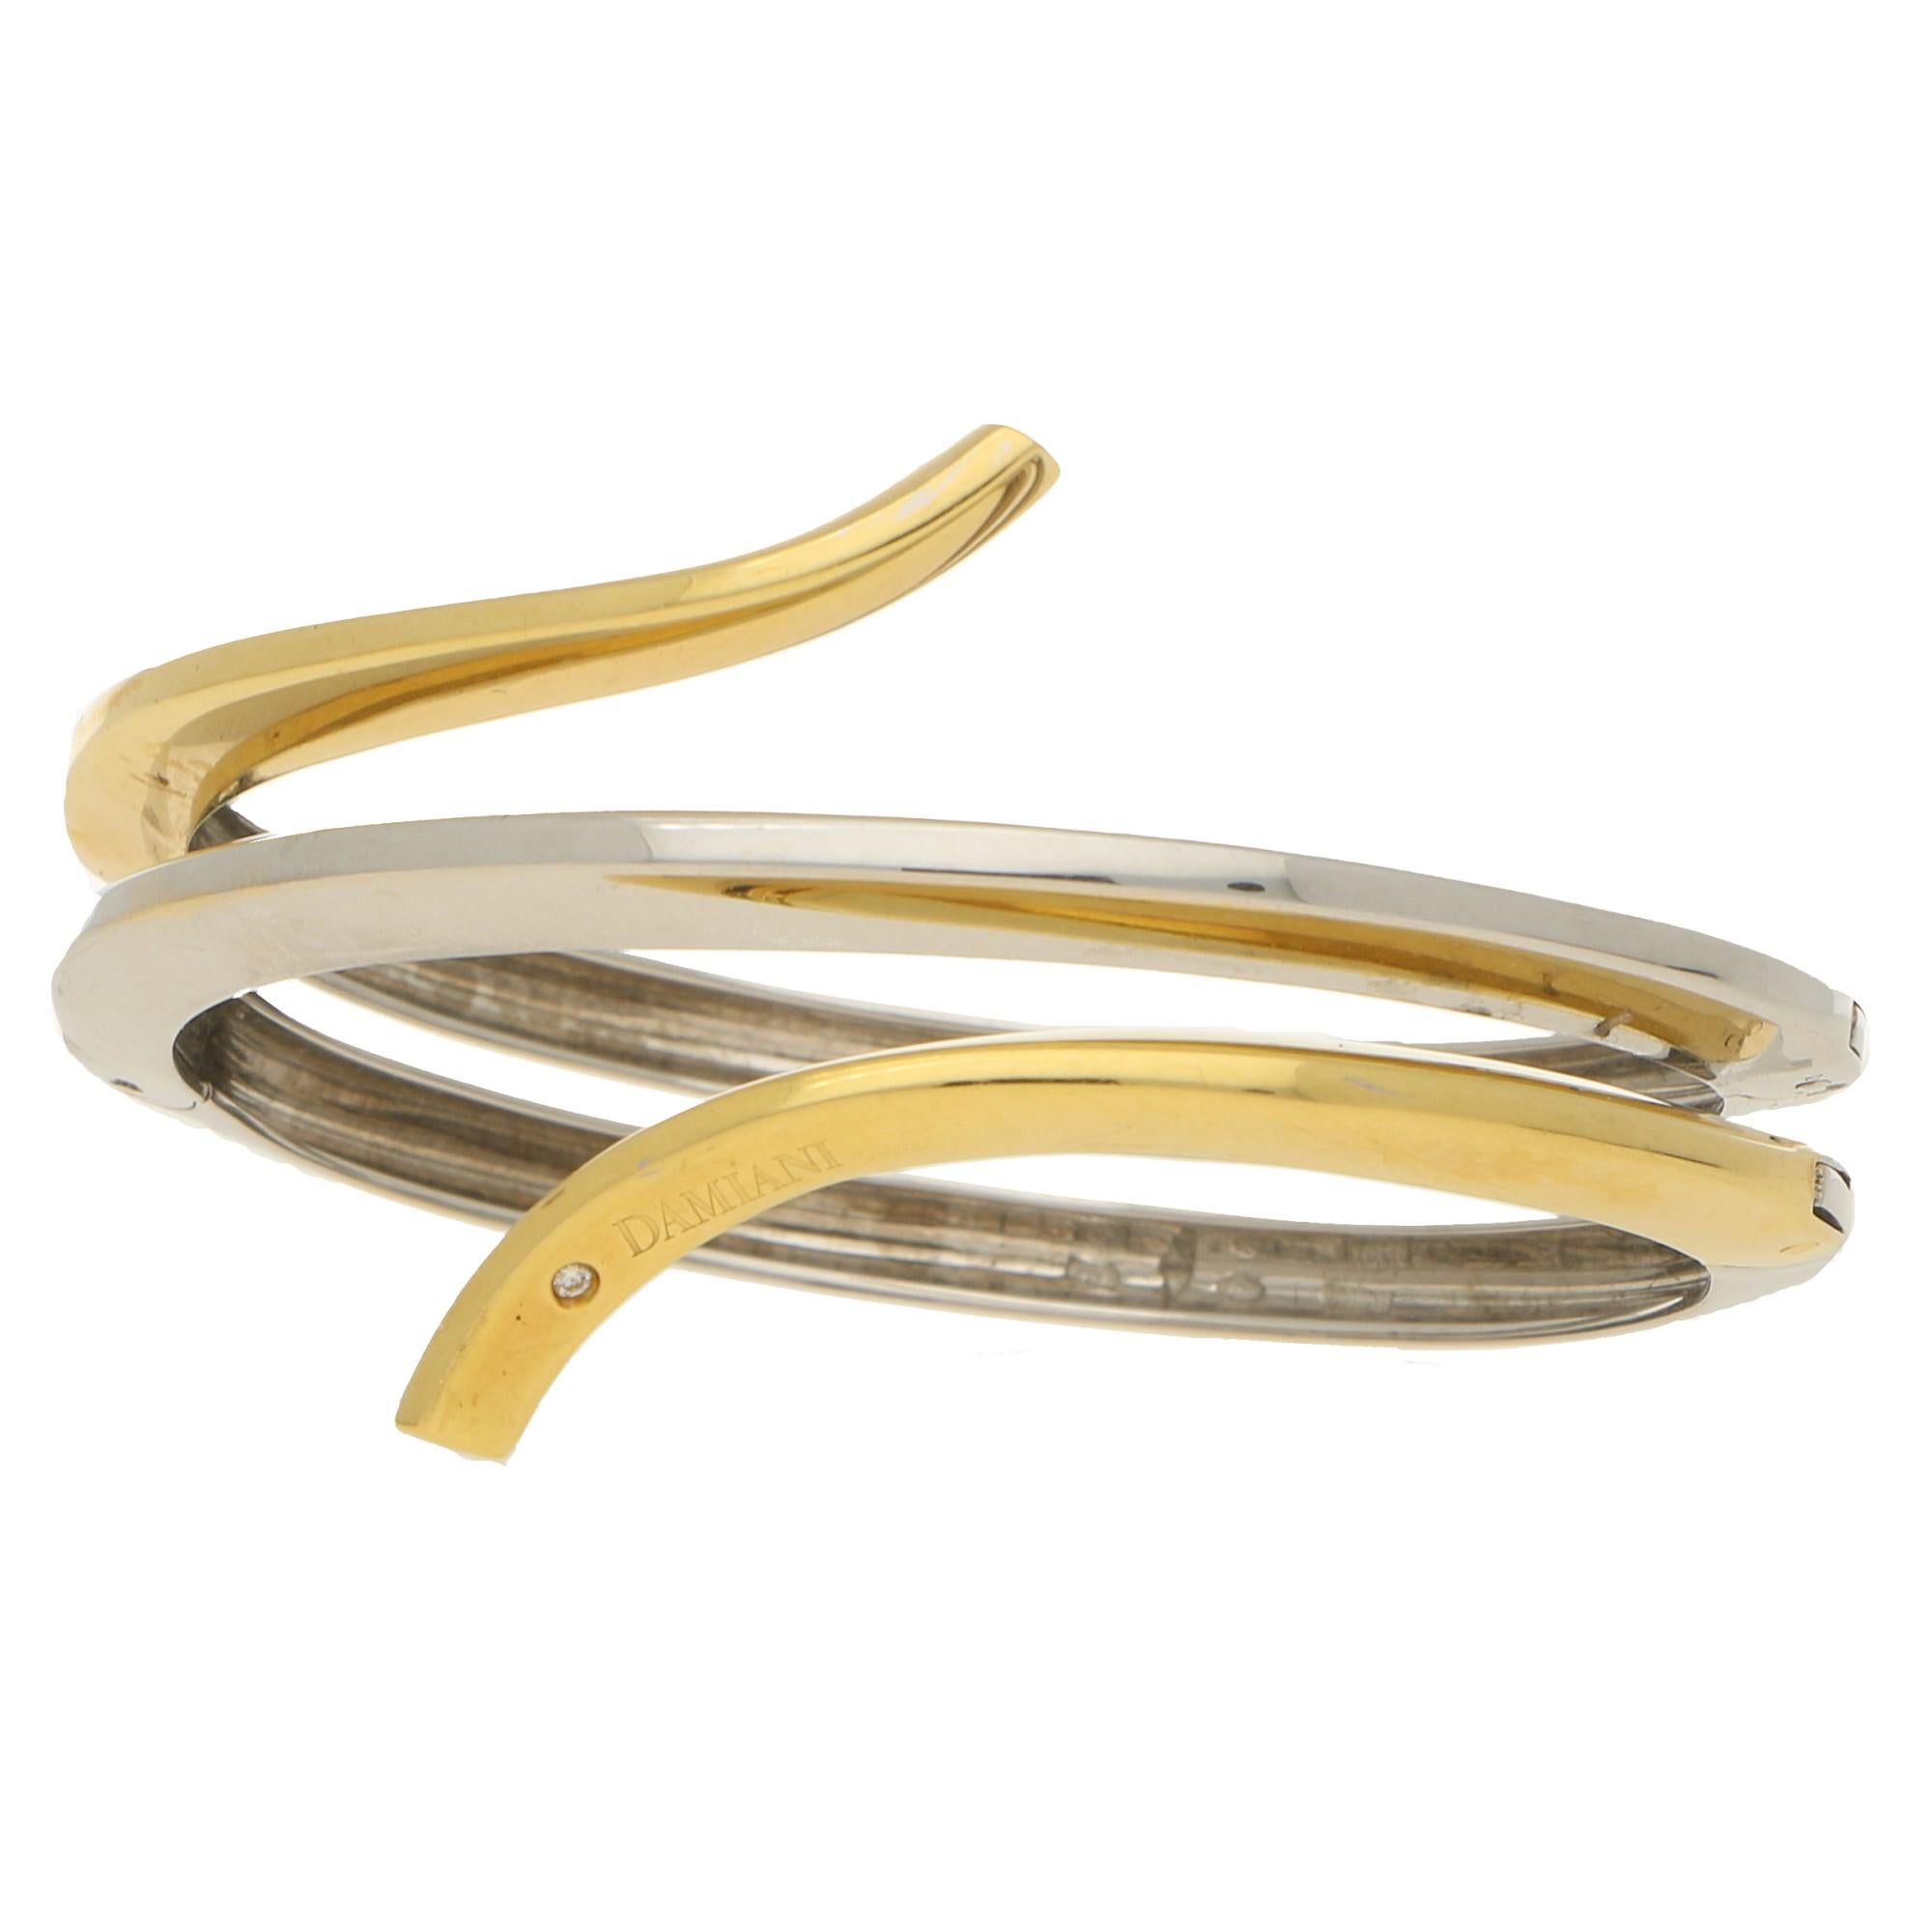 A highly unique Damiani Eden diamond bangle bracelet made of solid 18-karat yellow and white gold. 
This bracelet has an eccentric yet minimalistic design with a quadruple hinged fitting system. This makes the piece more secure whilst on the wrist